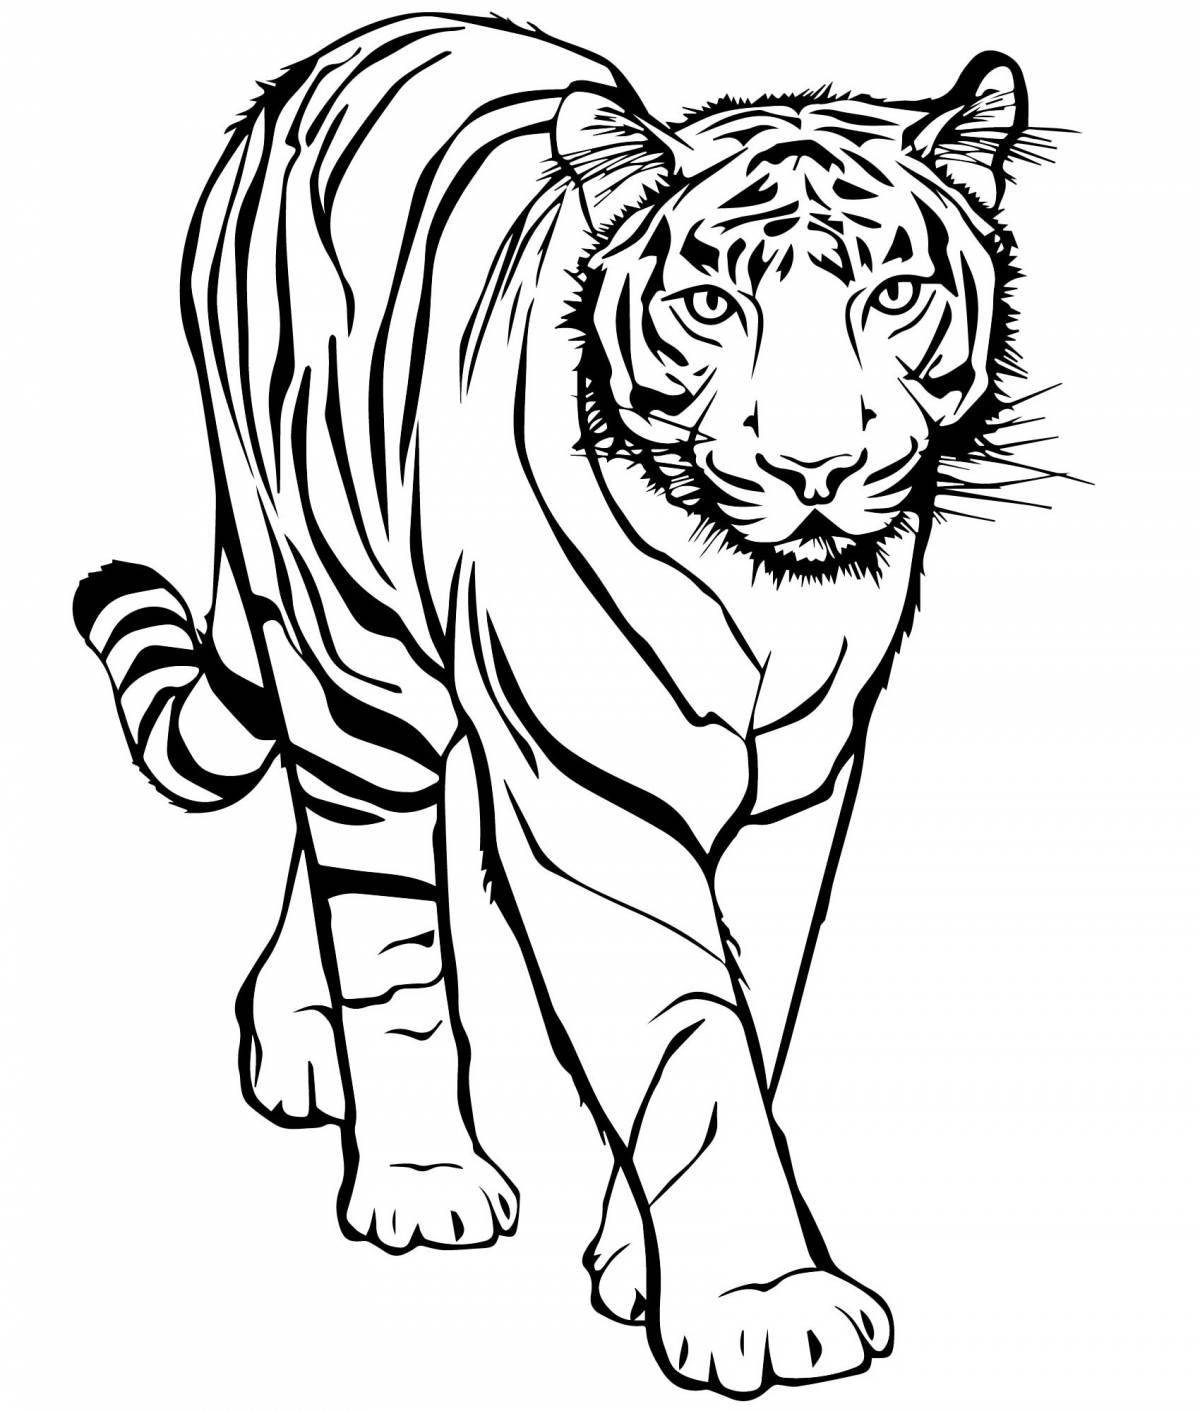 Adorable white tiger coloring page